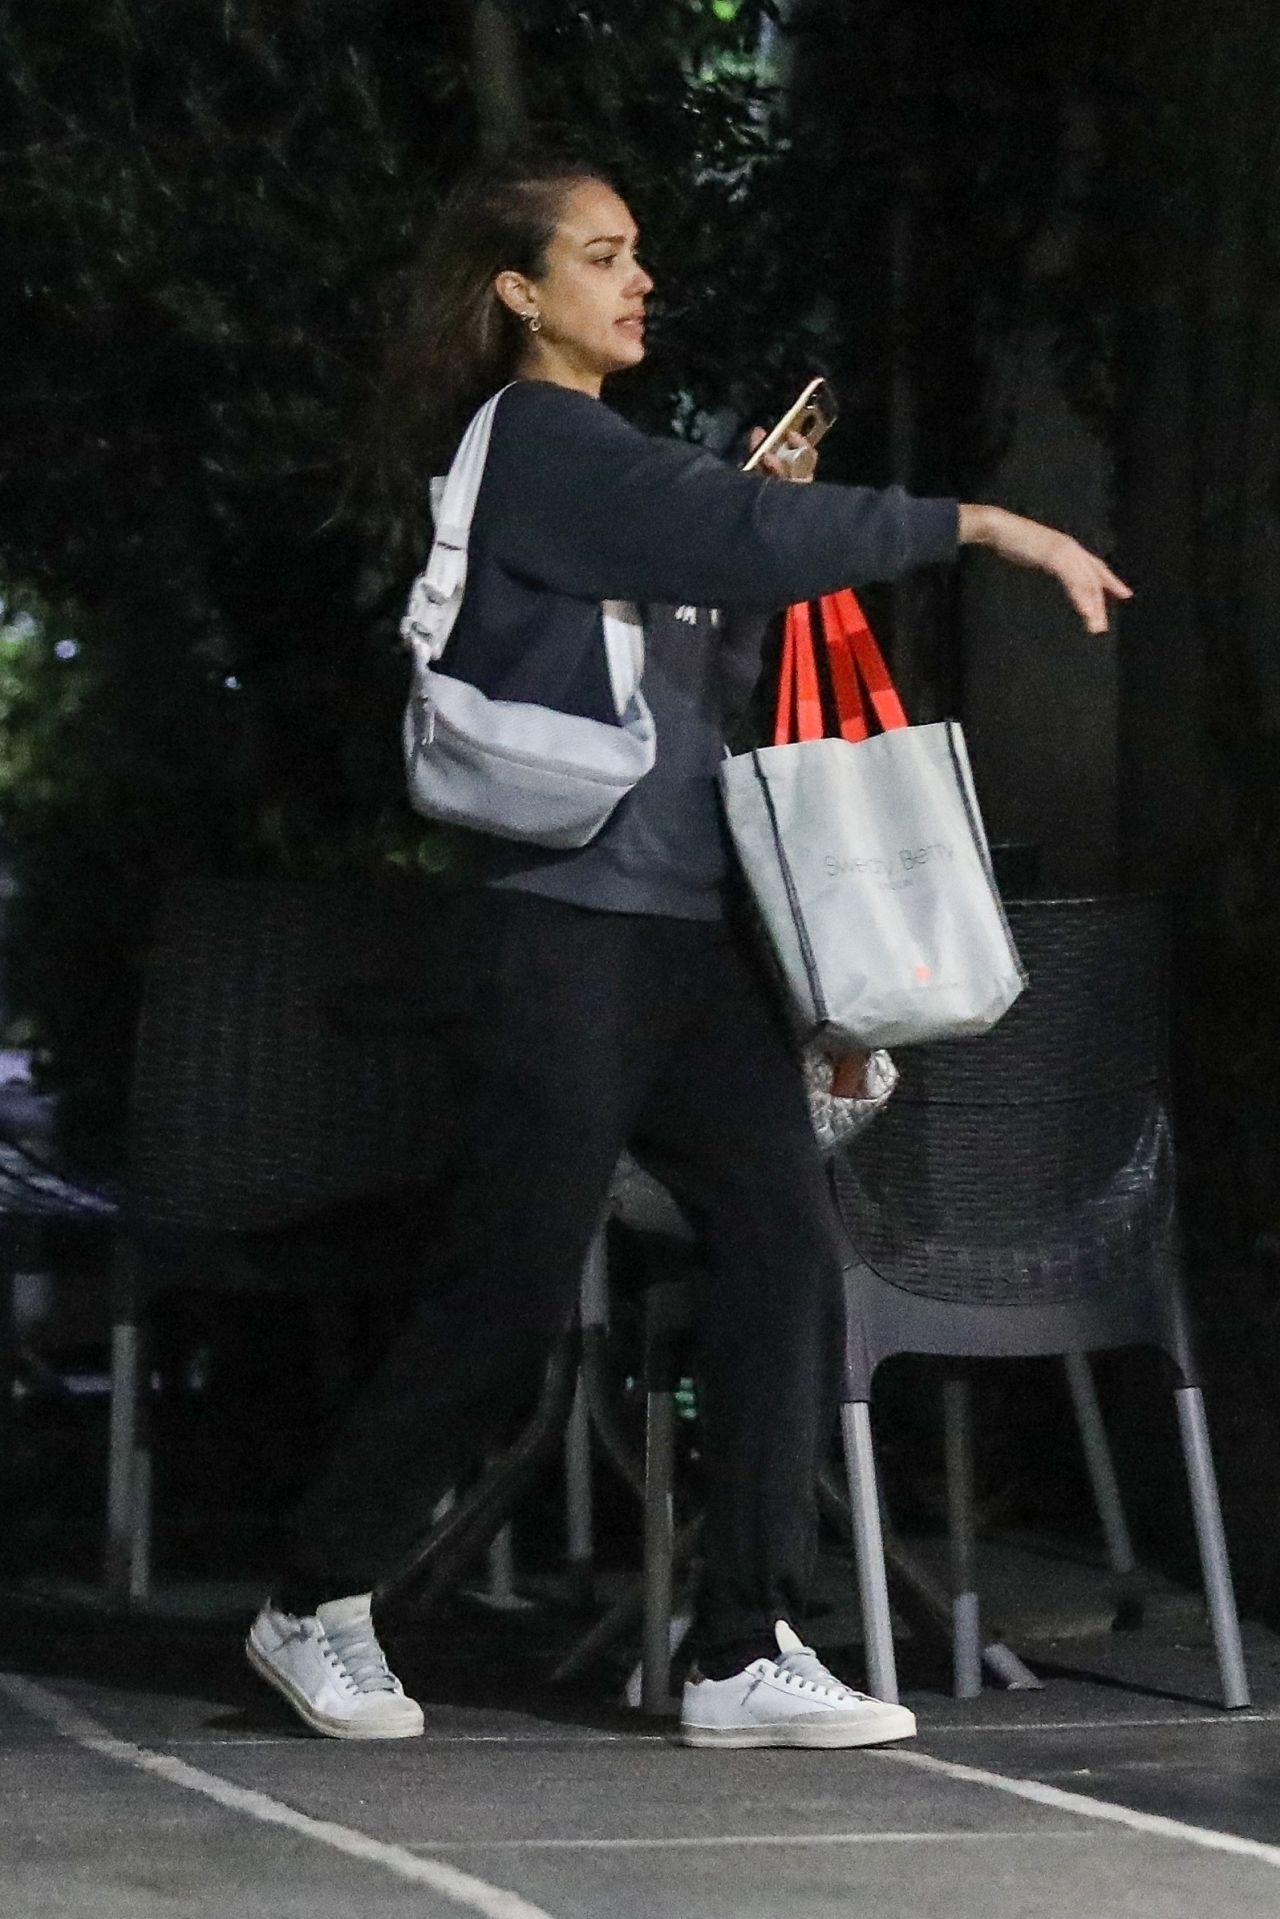 Jessica Alba Out In West Hollywood 01 16 2020 Celebmafia 5,294,406 likes · 2,038 talking about this. jessica alba out in west hollywood 01 16 2020 celebmafia